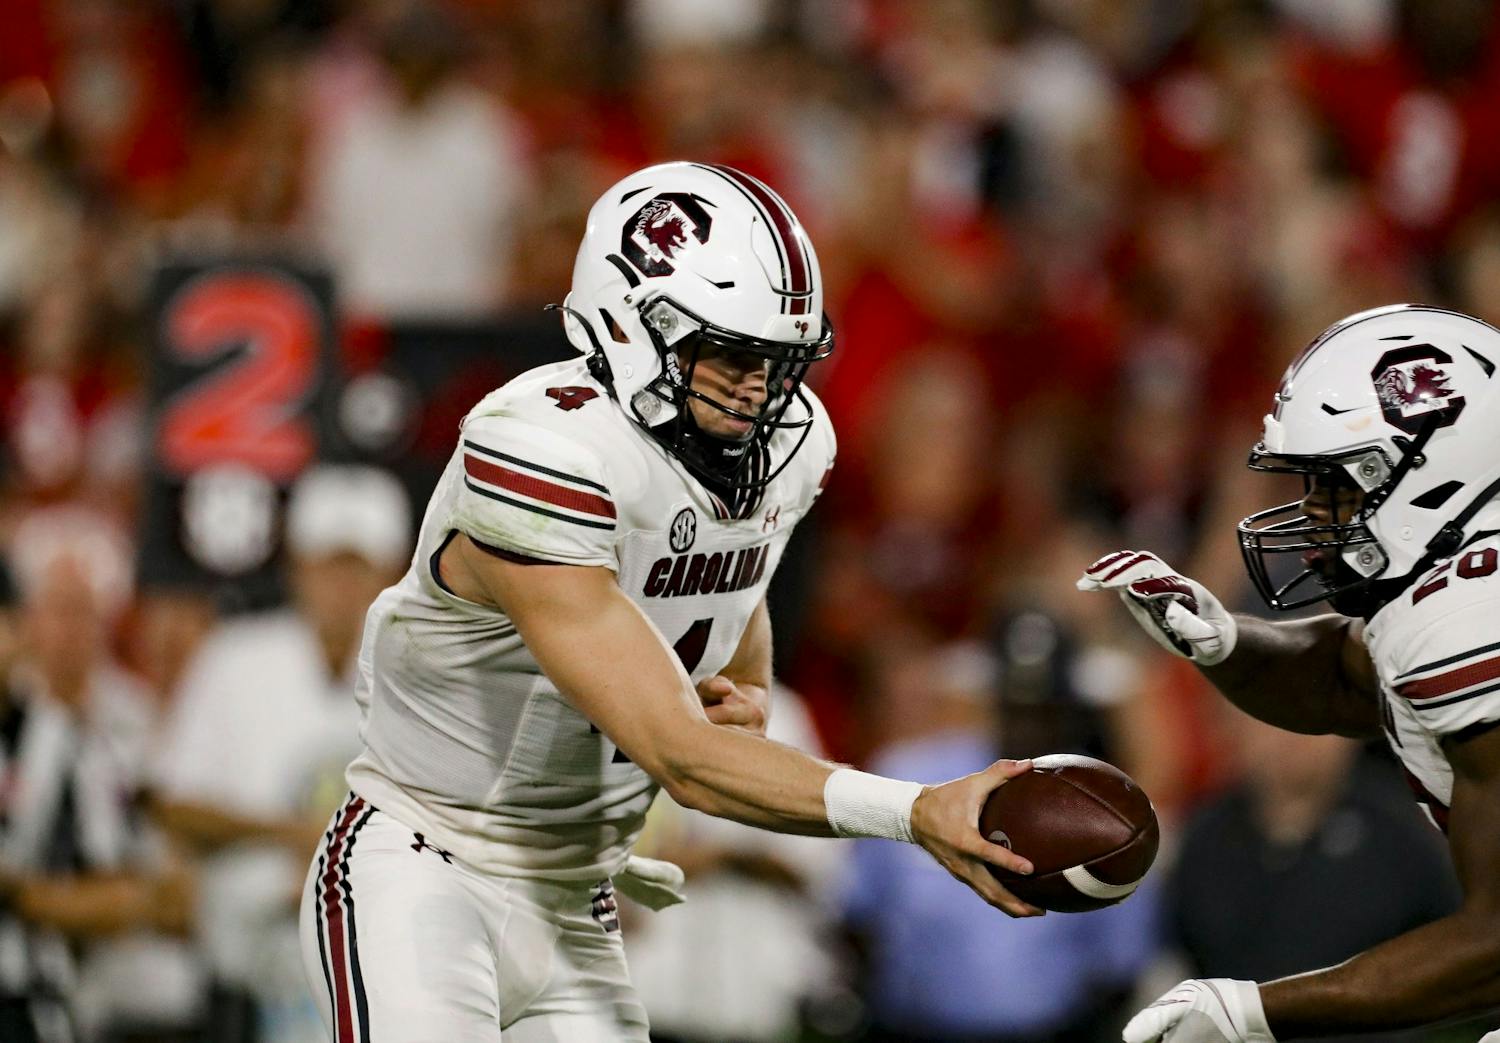 Sophomore quarterback Luke Doty hands the ball off to running back Kevin Harris in South Carolina's game against Georgia on Sept. 18, 2021.